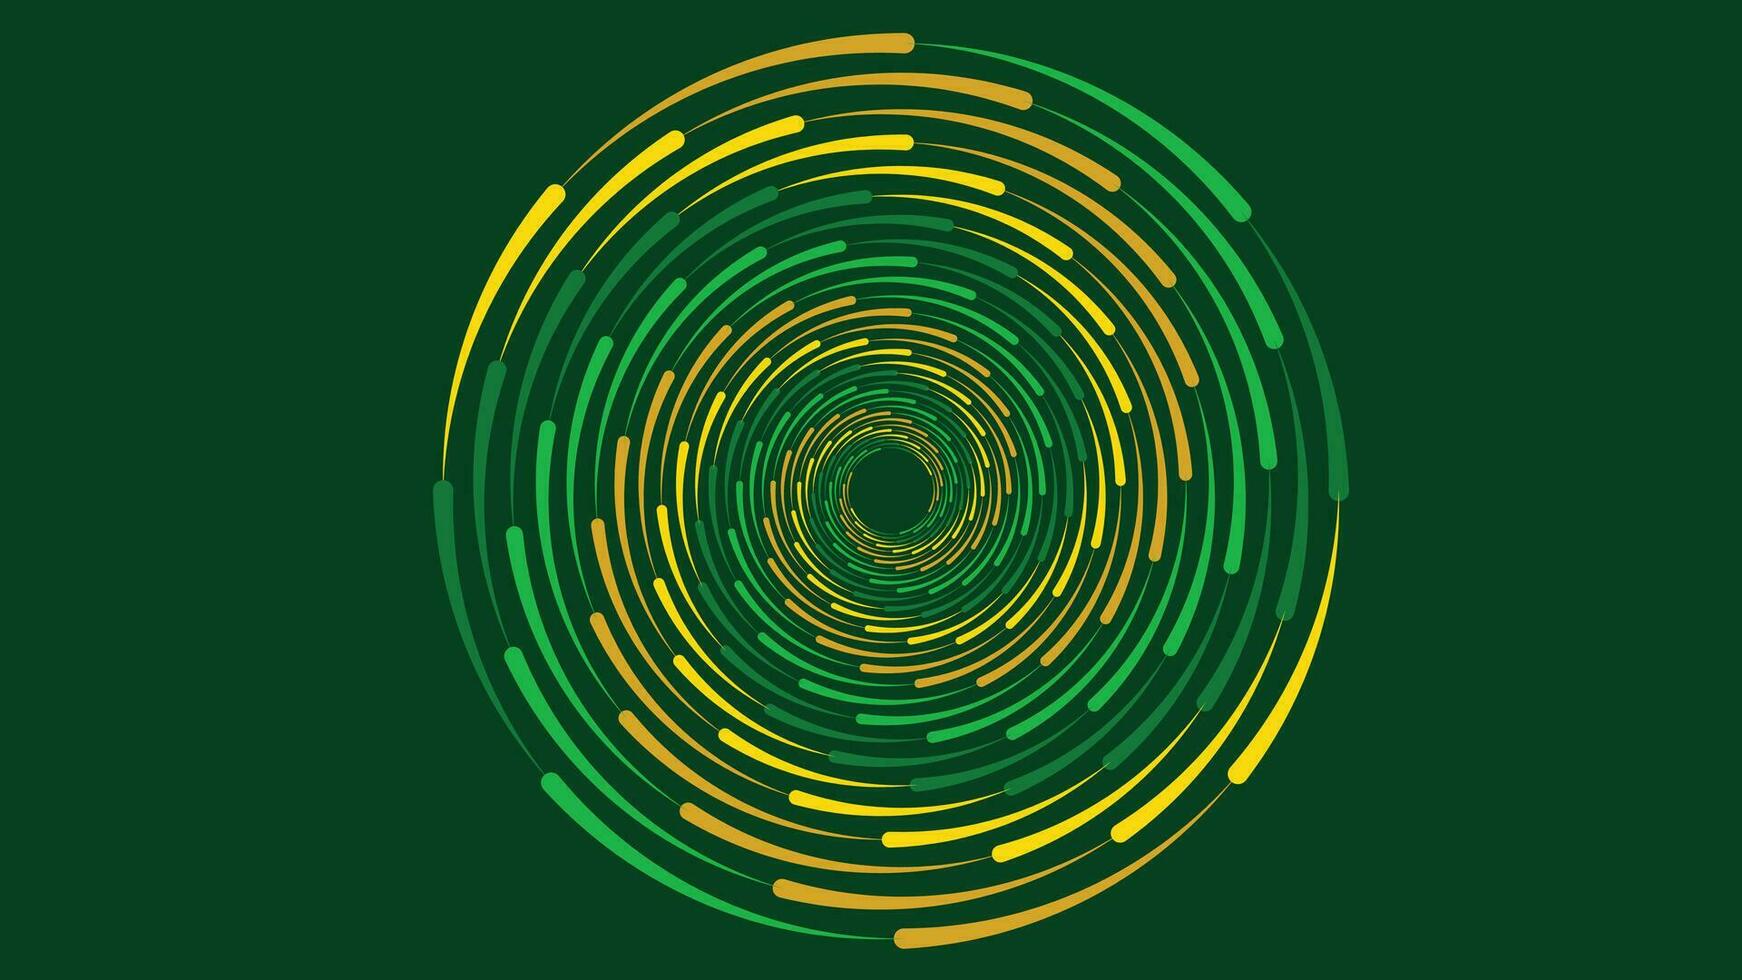 Abstract vortex spiral dotted background in dark green. This vortex design symbol can be used as a cyclone of information.n vector